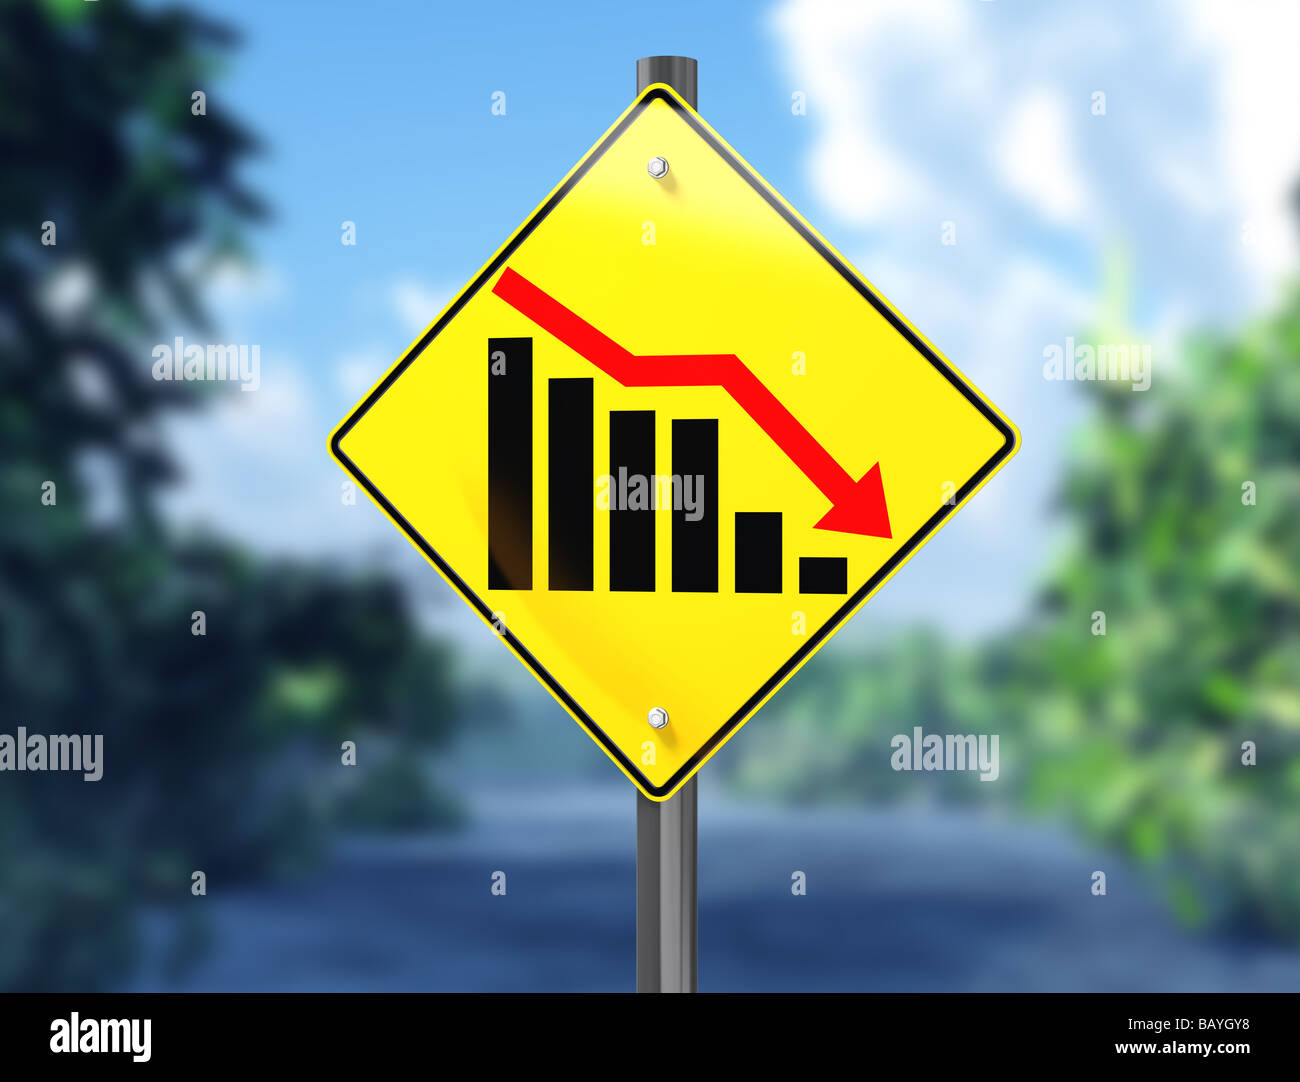 Illustration of a chart on a signpost showing a downward trend Stock Photo